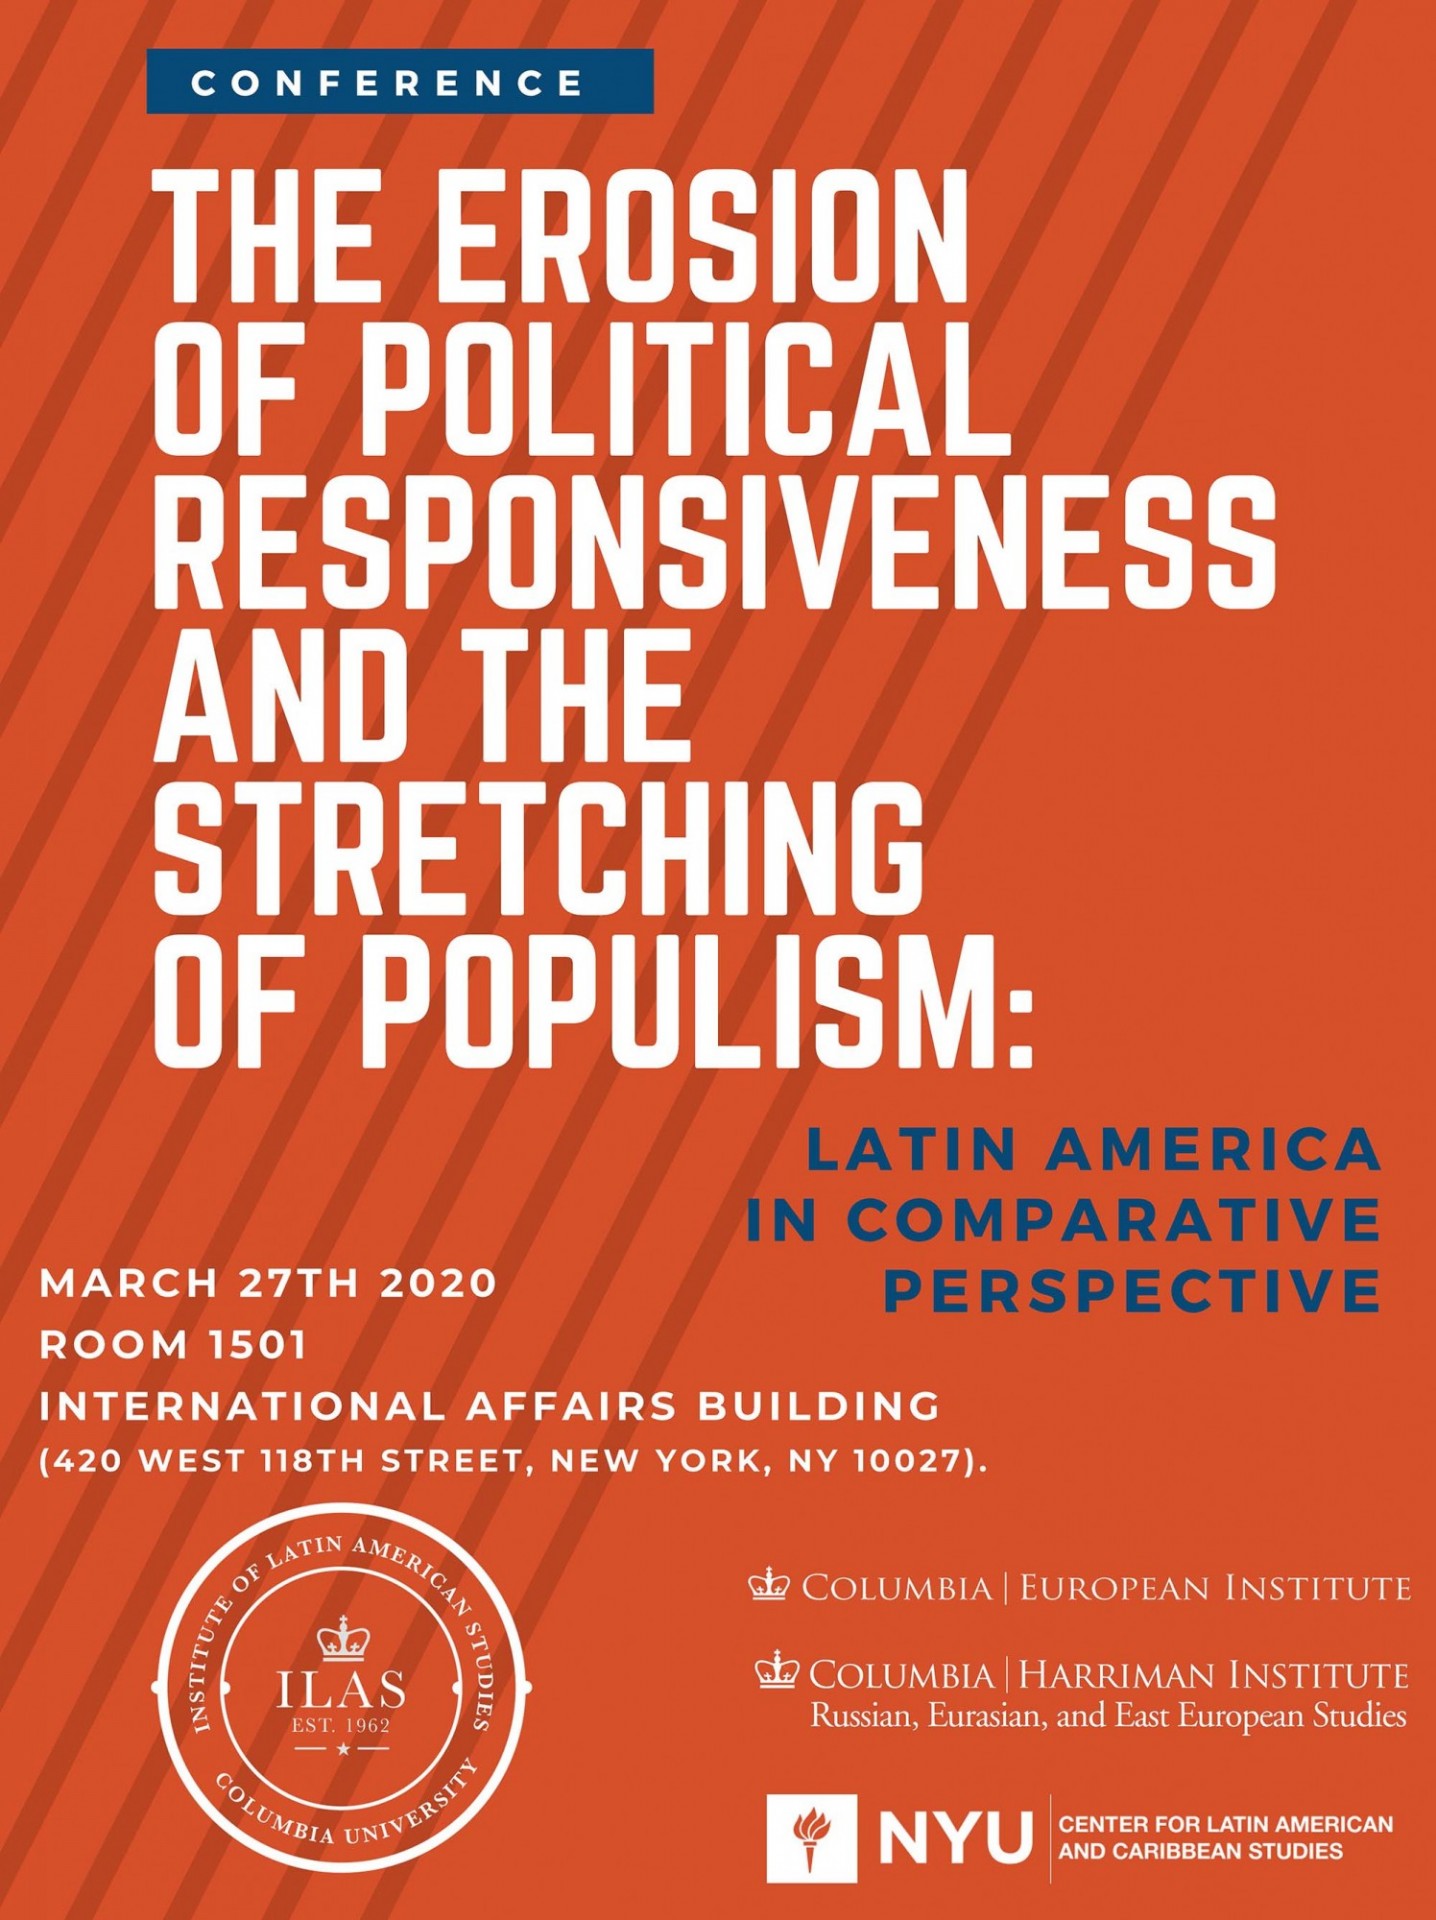 Flyer for Latin America in Comparative Perspective Conference